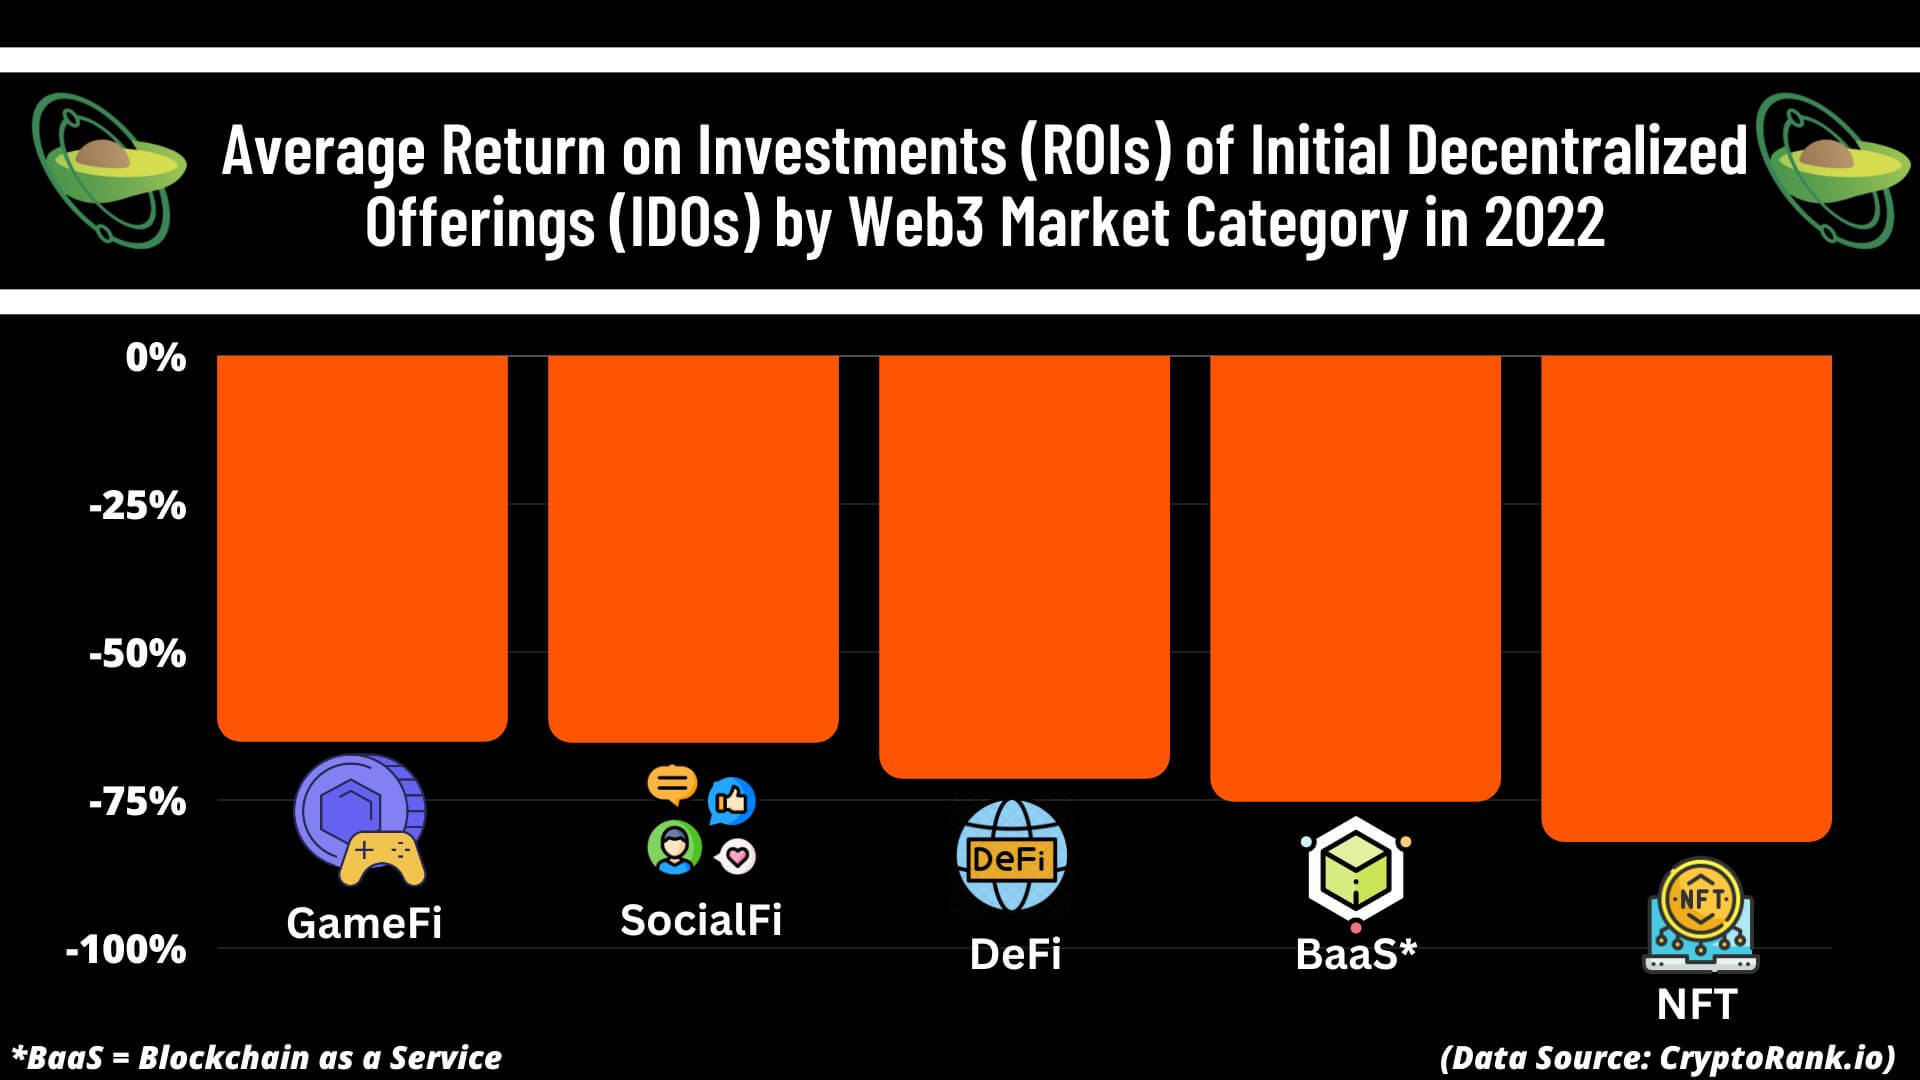 Average Return on Investments (ROIs) of Initial Decentralized Offerings (IDOs) by Web3 Market Category in 2022 (4).jpg